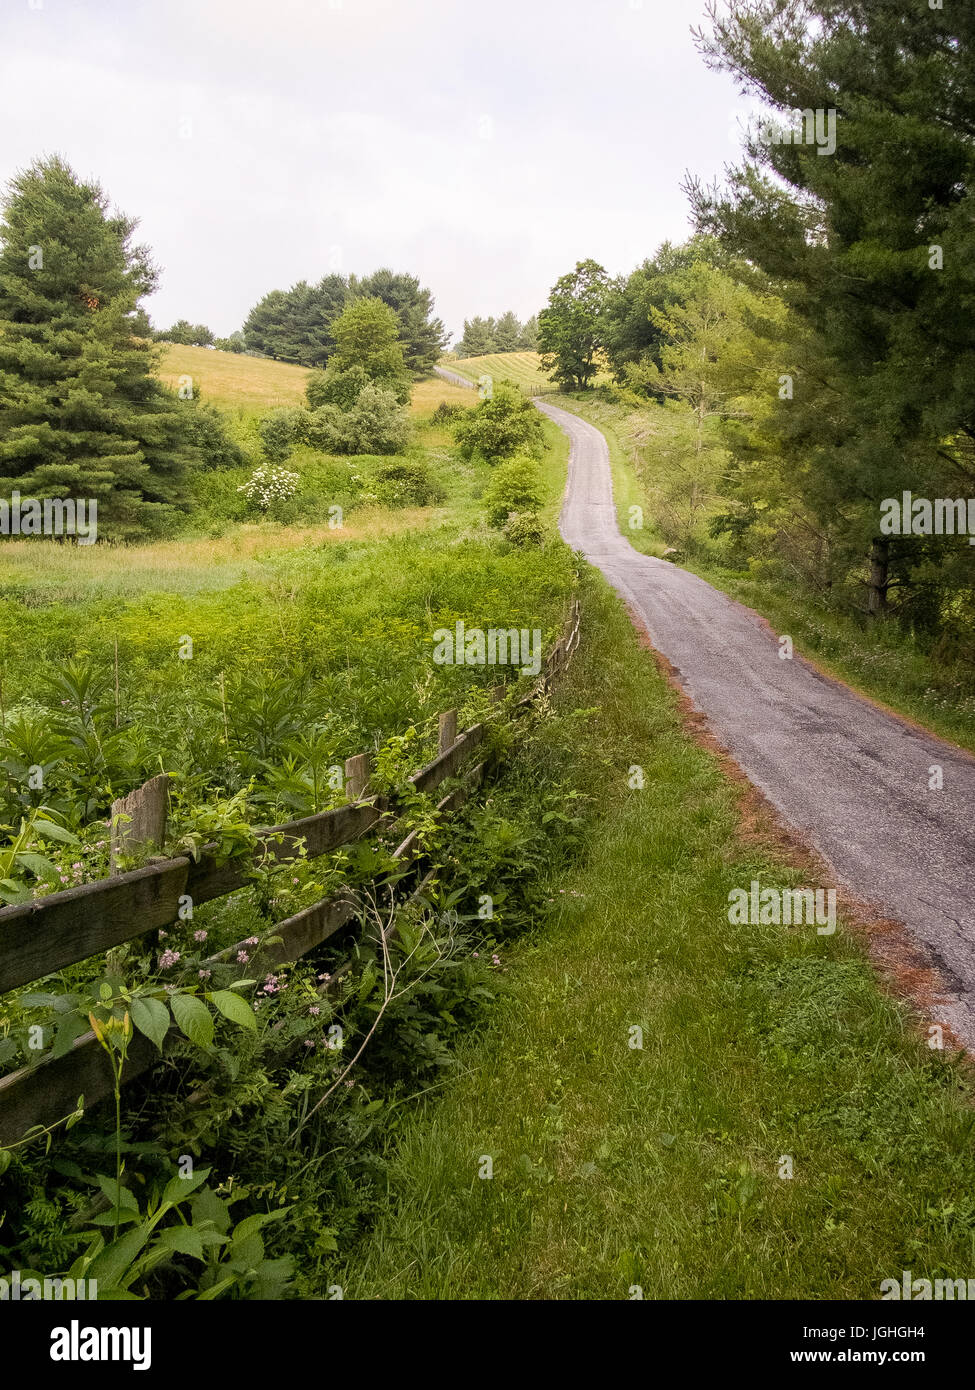 Rural, country road, green grass and trees Stock Photo